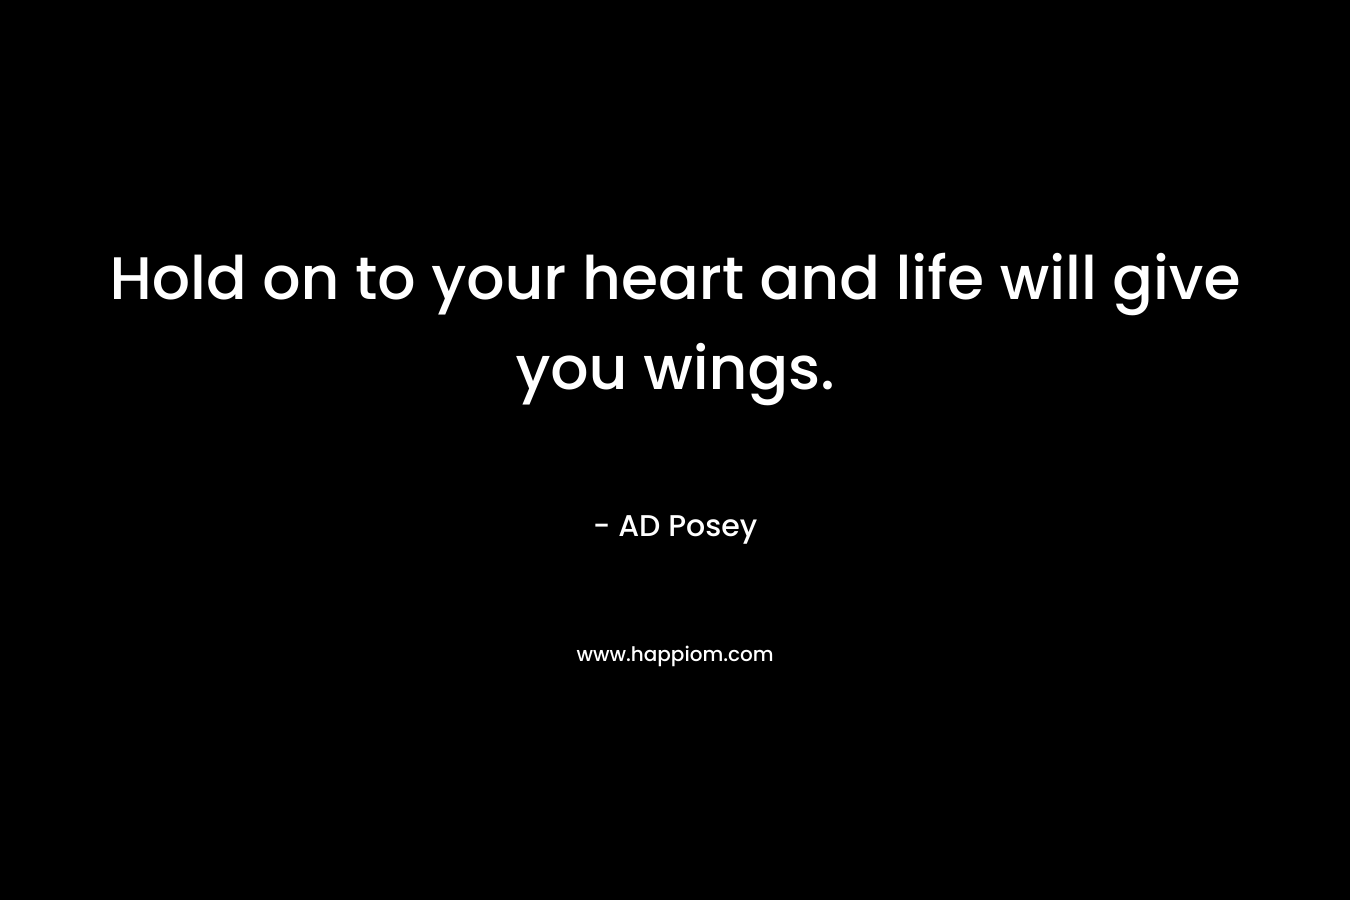 Hold on to your heart and life will give you wings.